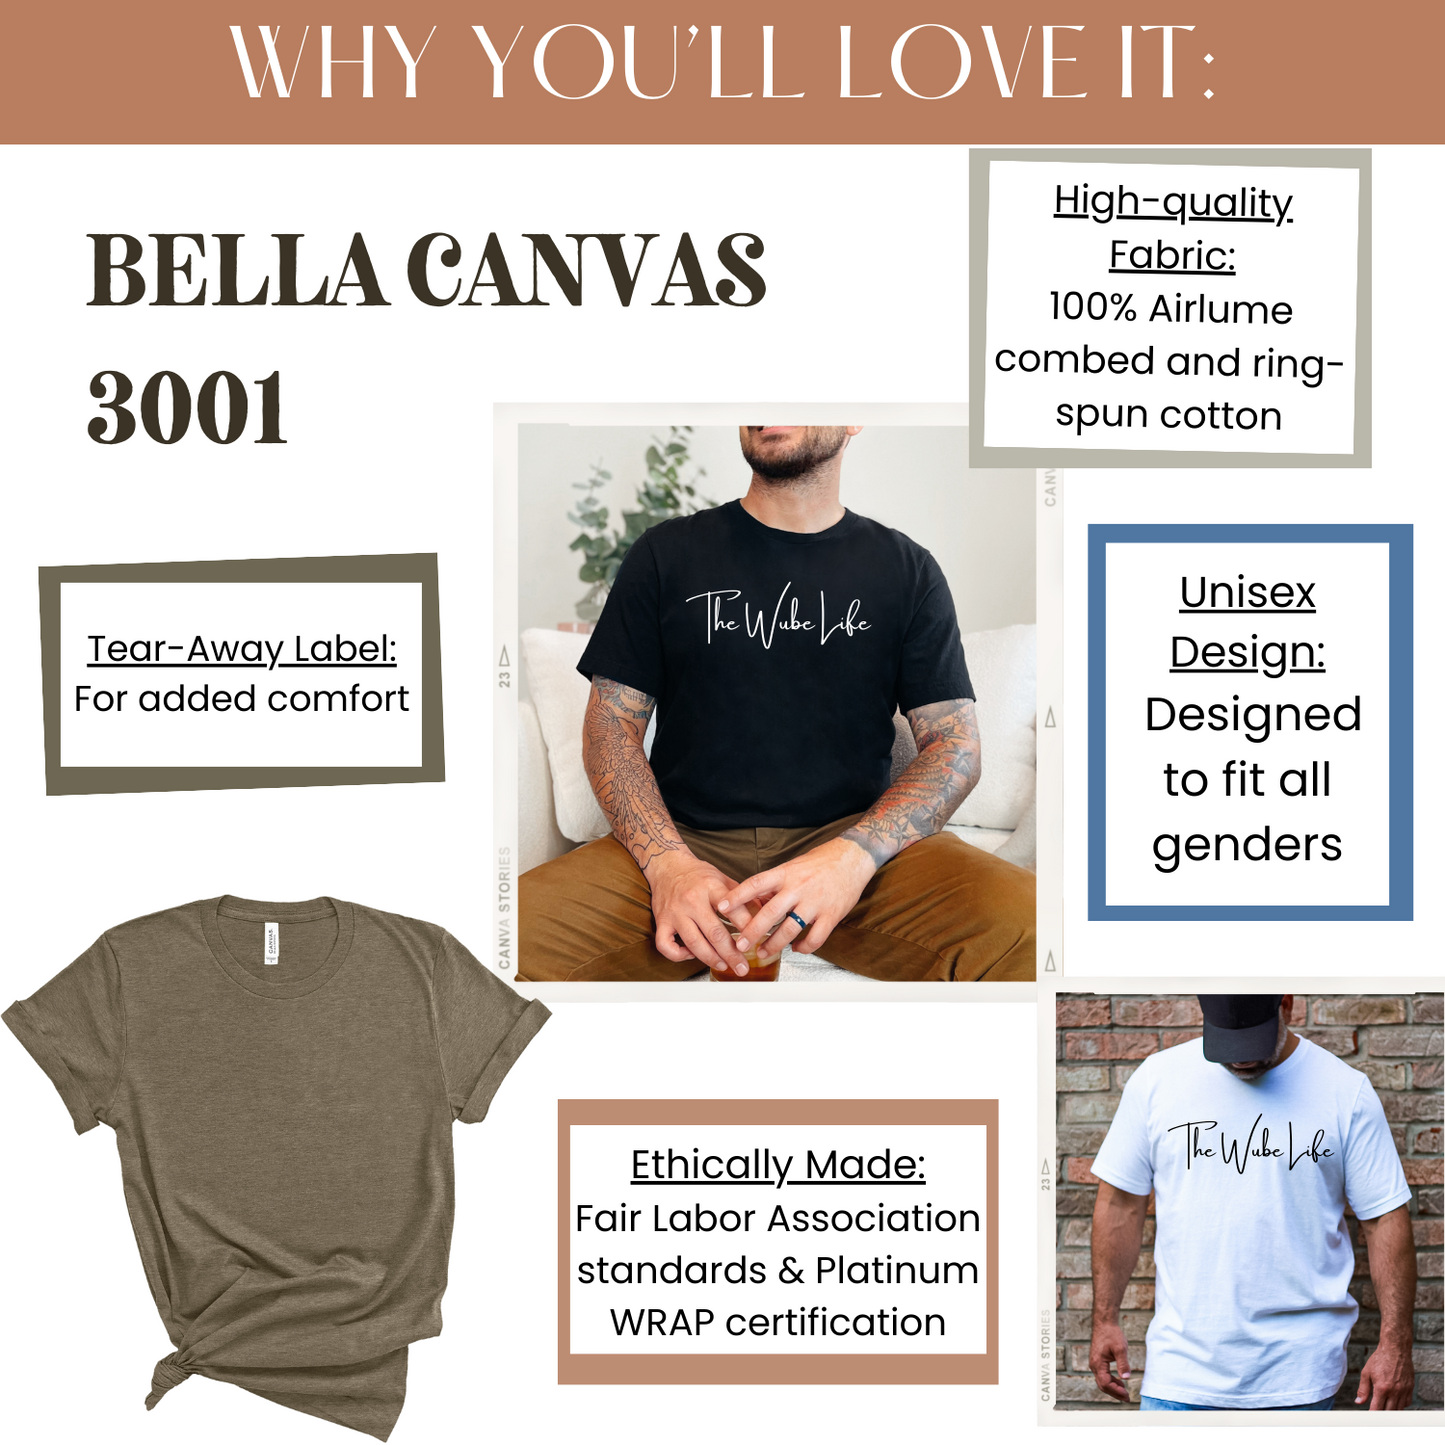 Reasons you'll love the Bella Canvas 3001 t-shirts from The Wube Life Design Shop: high-quality fabric, unisex design, ethically made, tear-away label